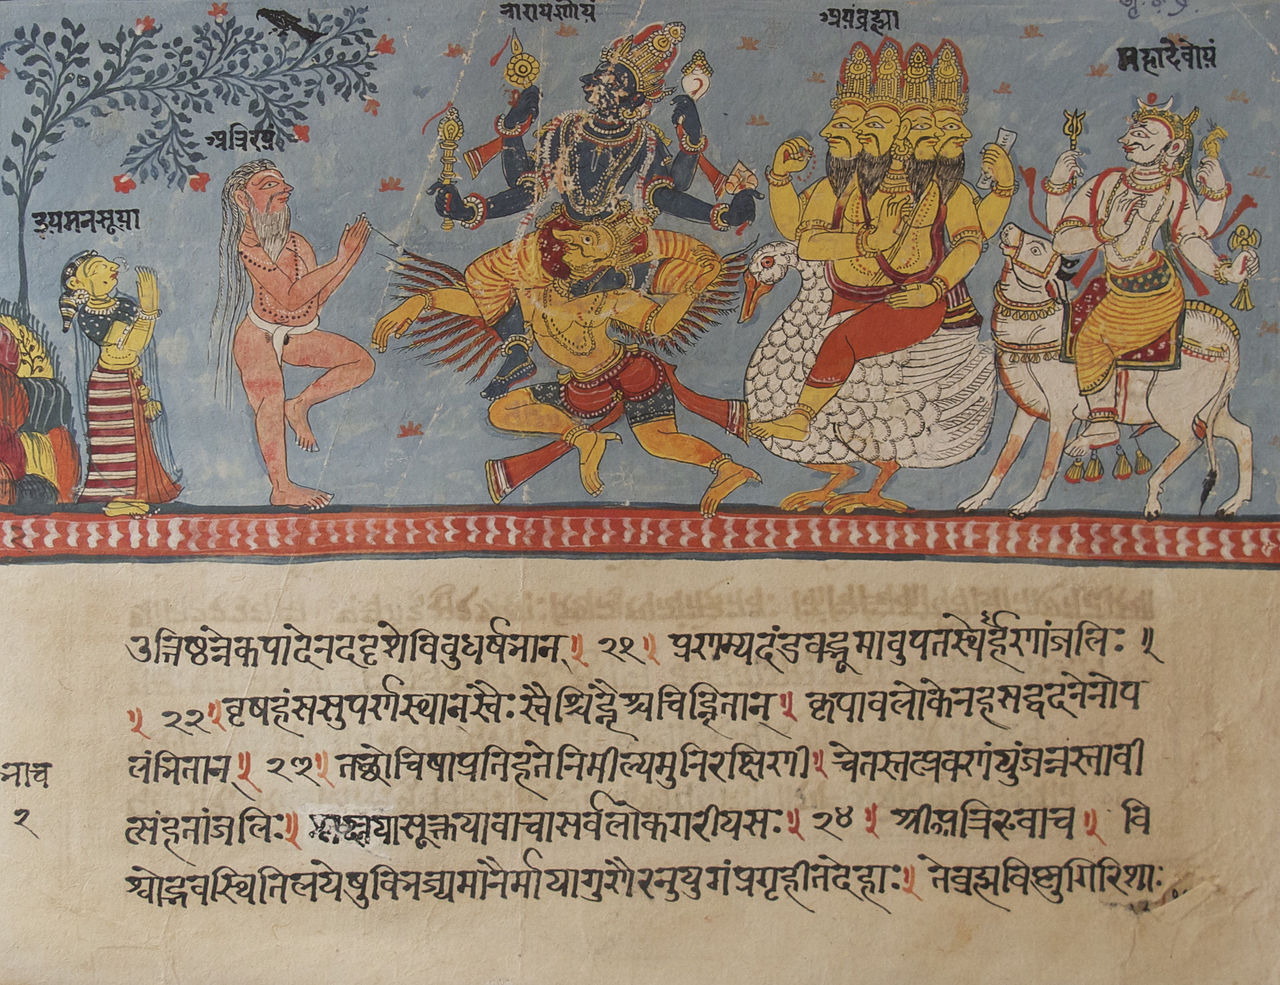 Comparing the Concepts of Divinity in Upanishads and Puranas